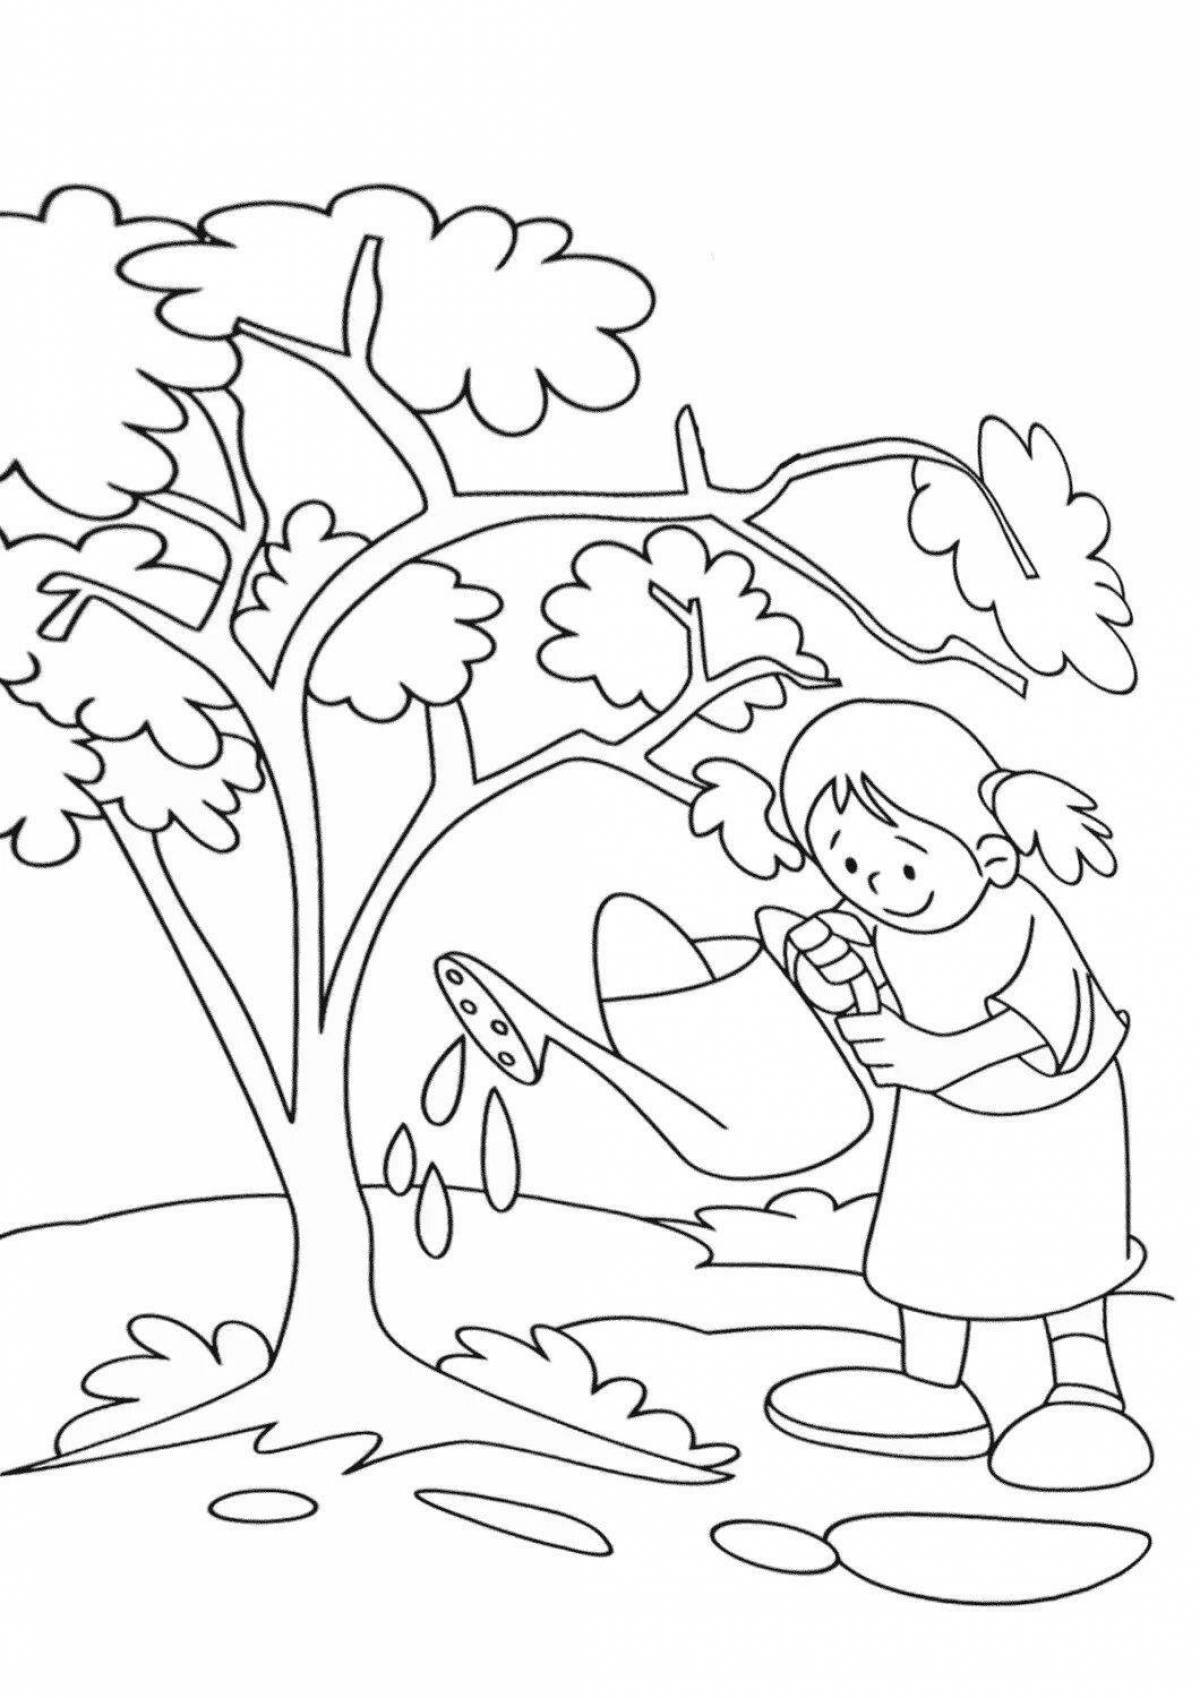 Awesome Nature Protection Coloring Page